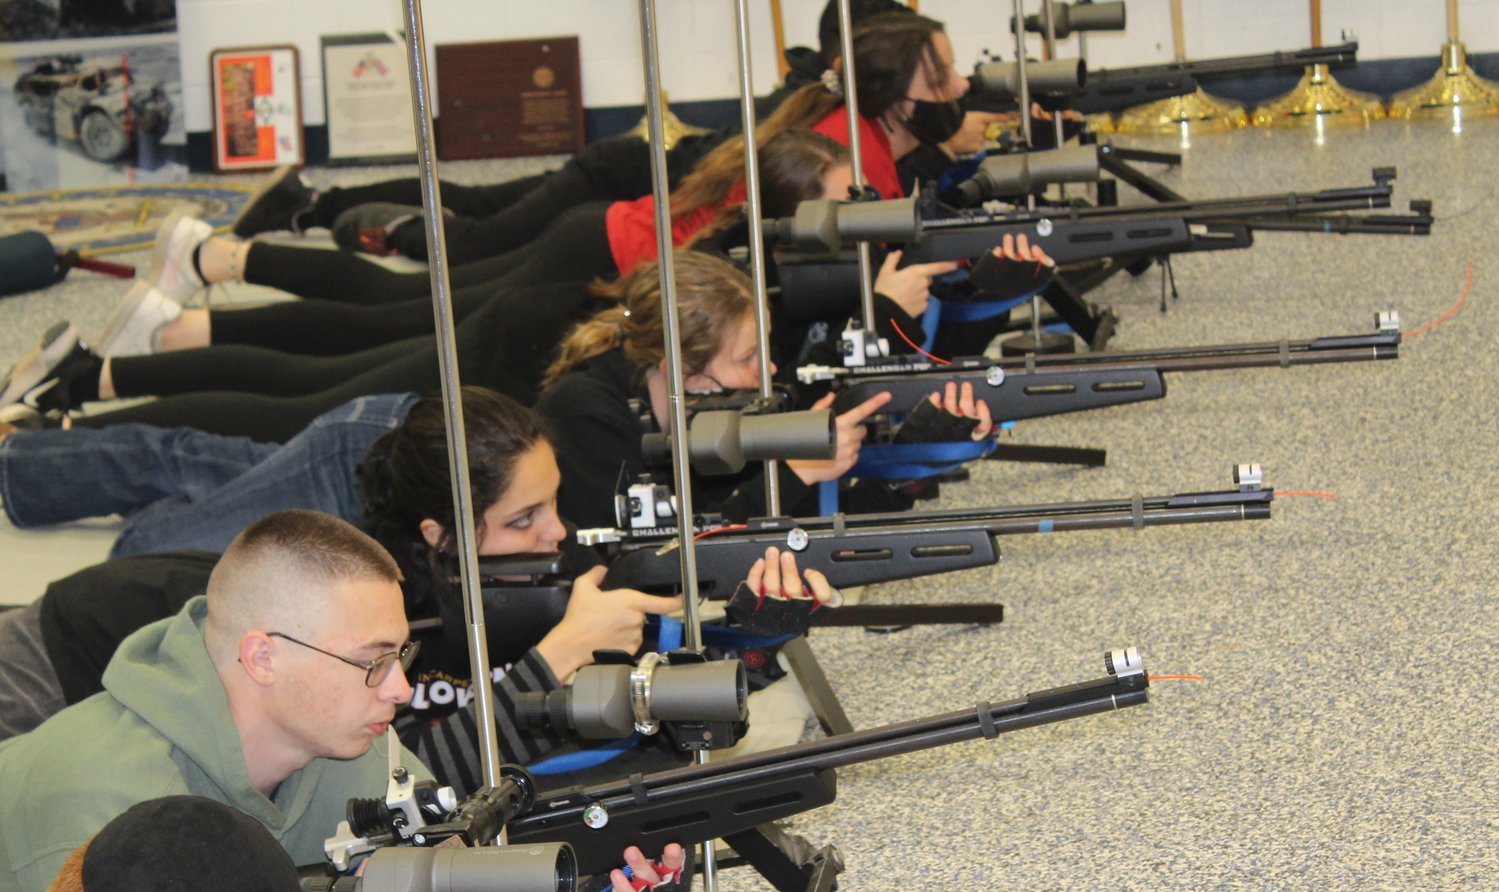 Cadets with the Robertsdale High School Naval Junior ROTC, comprised of students from Robertsdale and Elberta high schools, practice for the Area 8 Air Rifle Championship in hopes of qualifying for national competition.